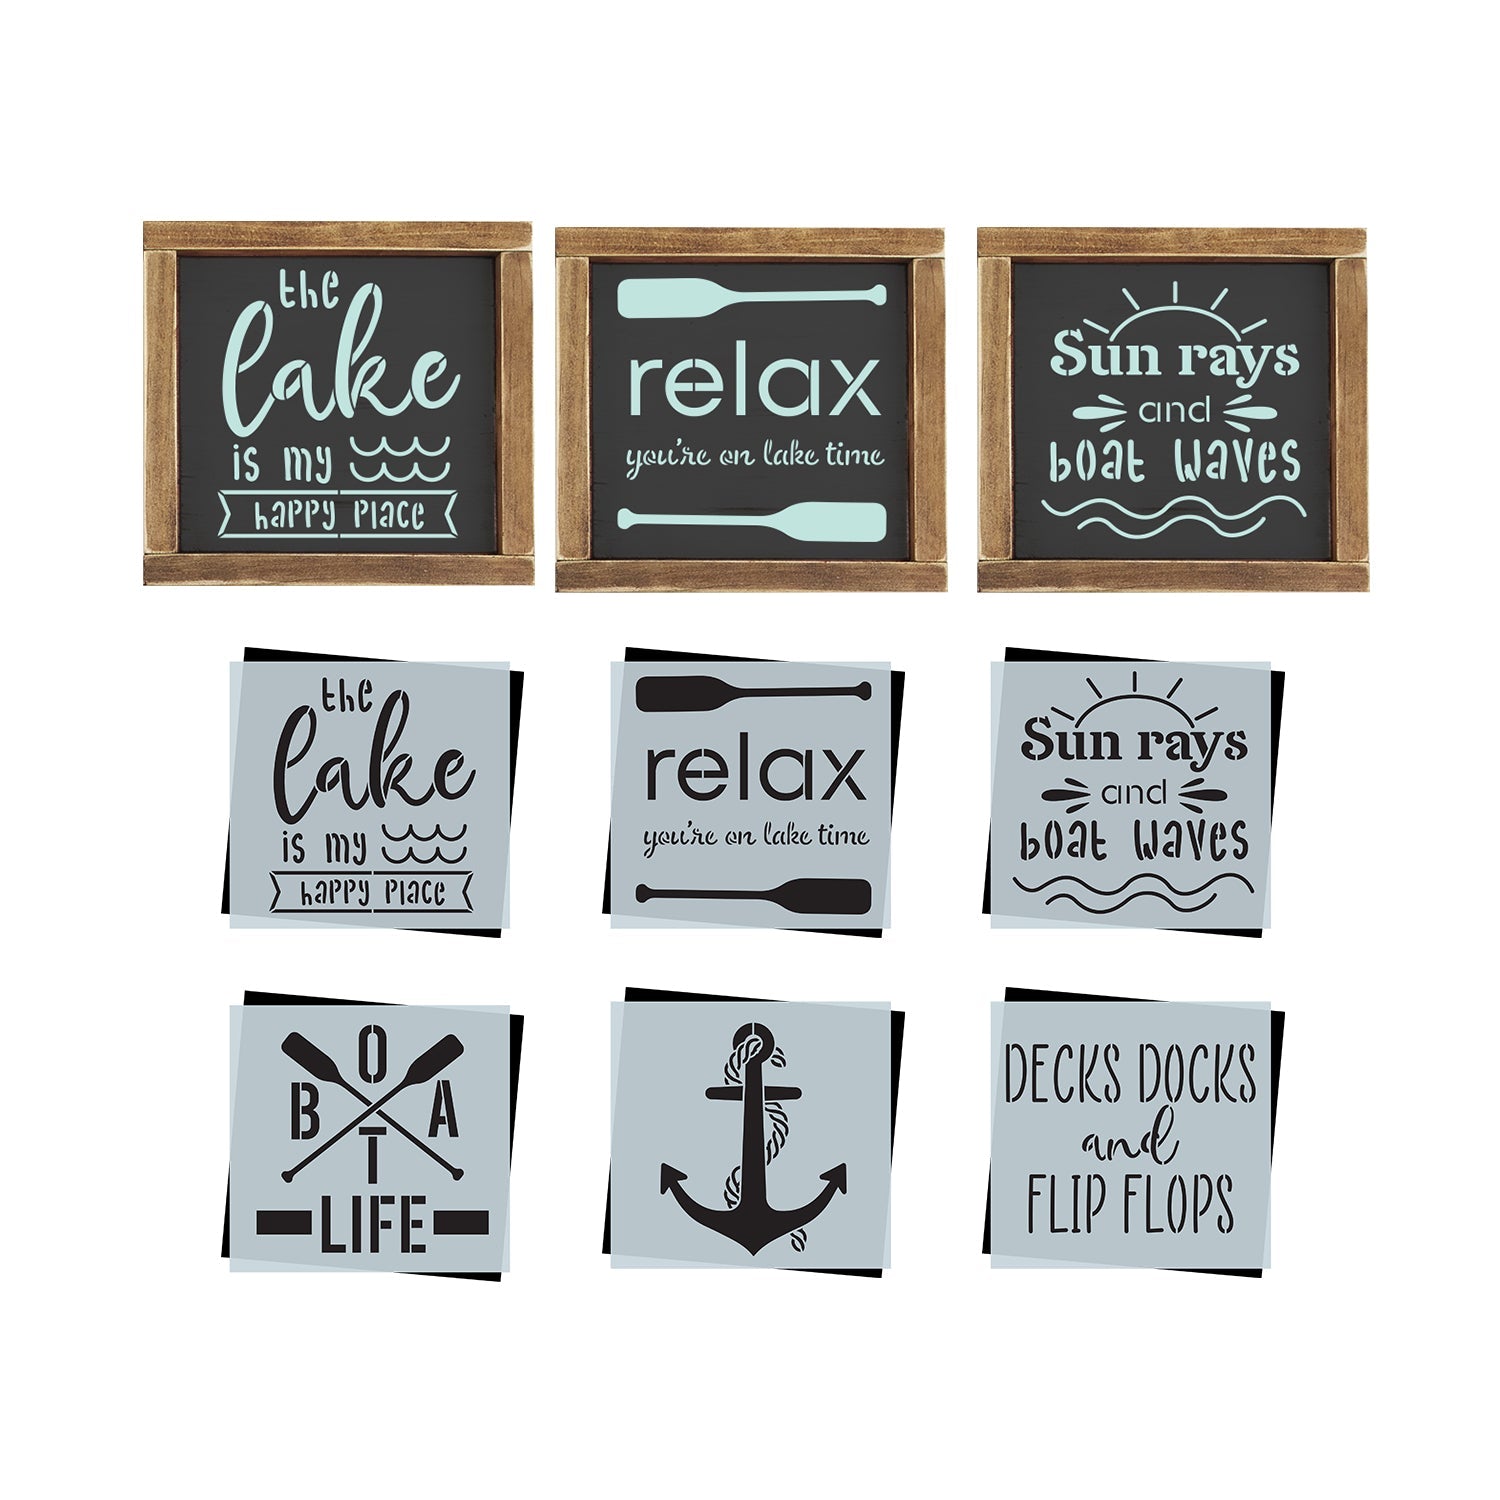 DIY reusable mini lake stencils for wood signs, the lake is my happy place stencil, relax you're on lake time, sun rays and boat waves, boat life paddles, anchor and rope, decks docks and flip flops stencils for mini wood signs, summer diy home decor, lake house tiered tray diy decor